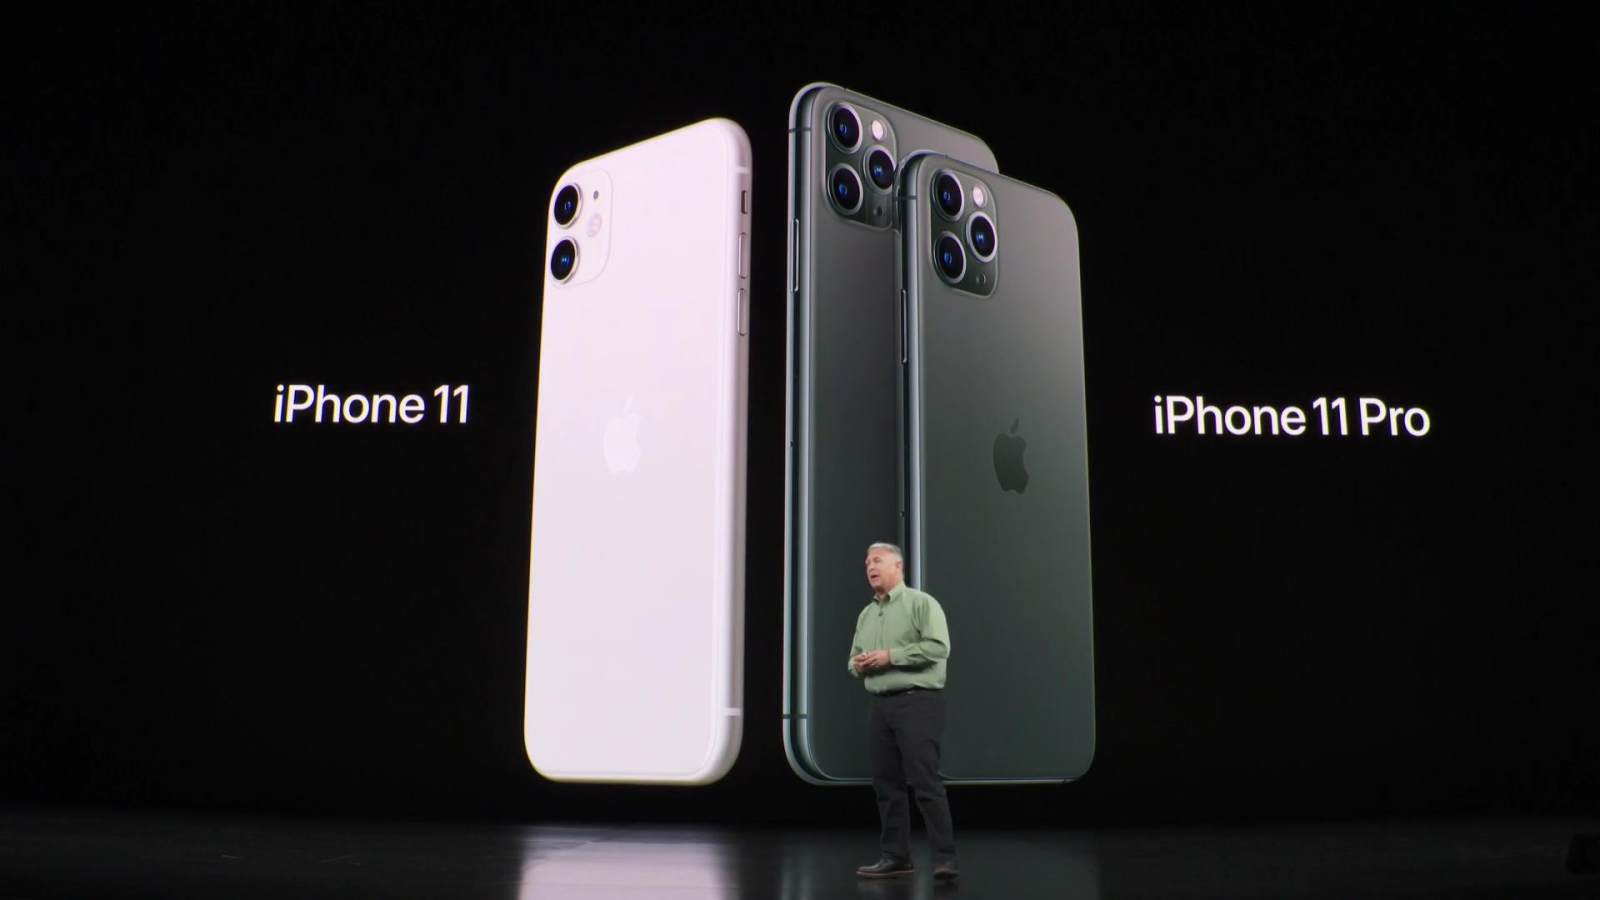 iPhone11正式公布，5分钟看完2019苹果秋季发布会